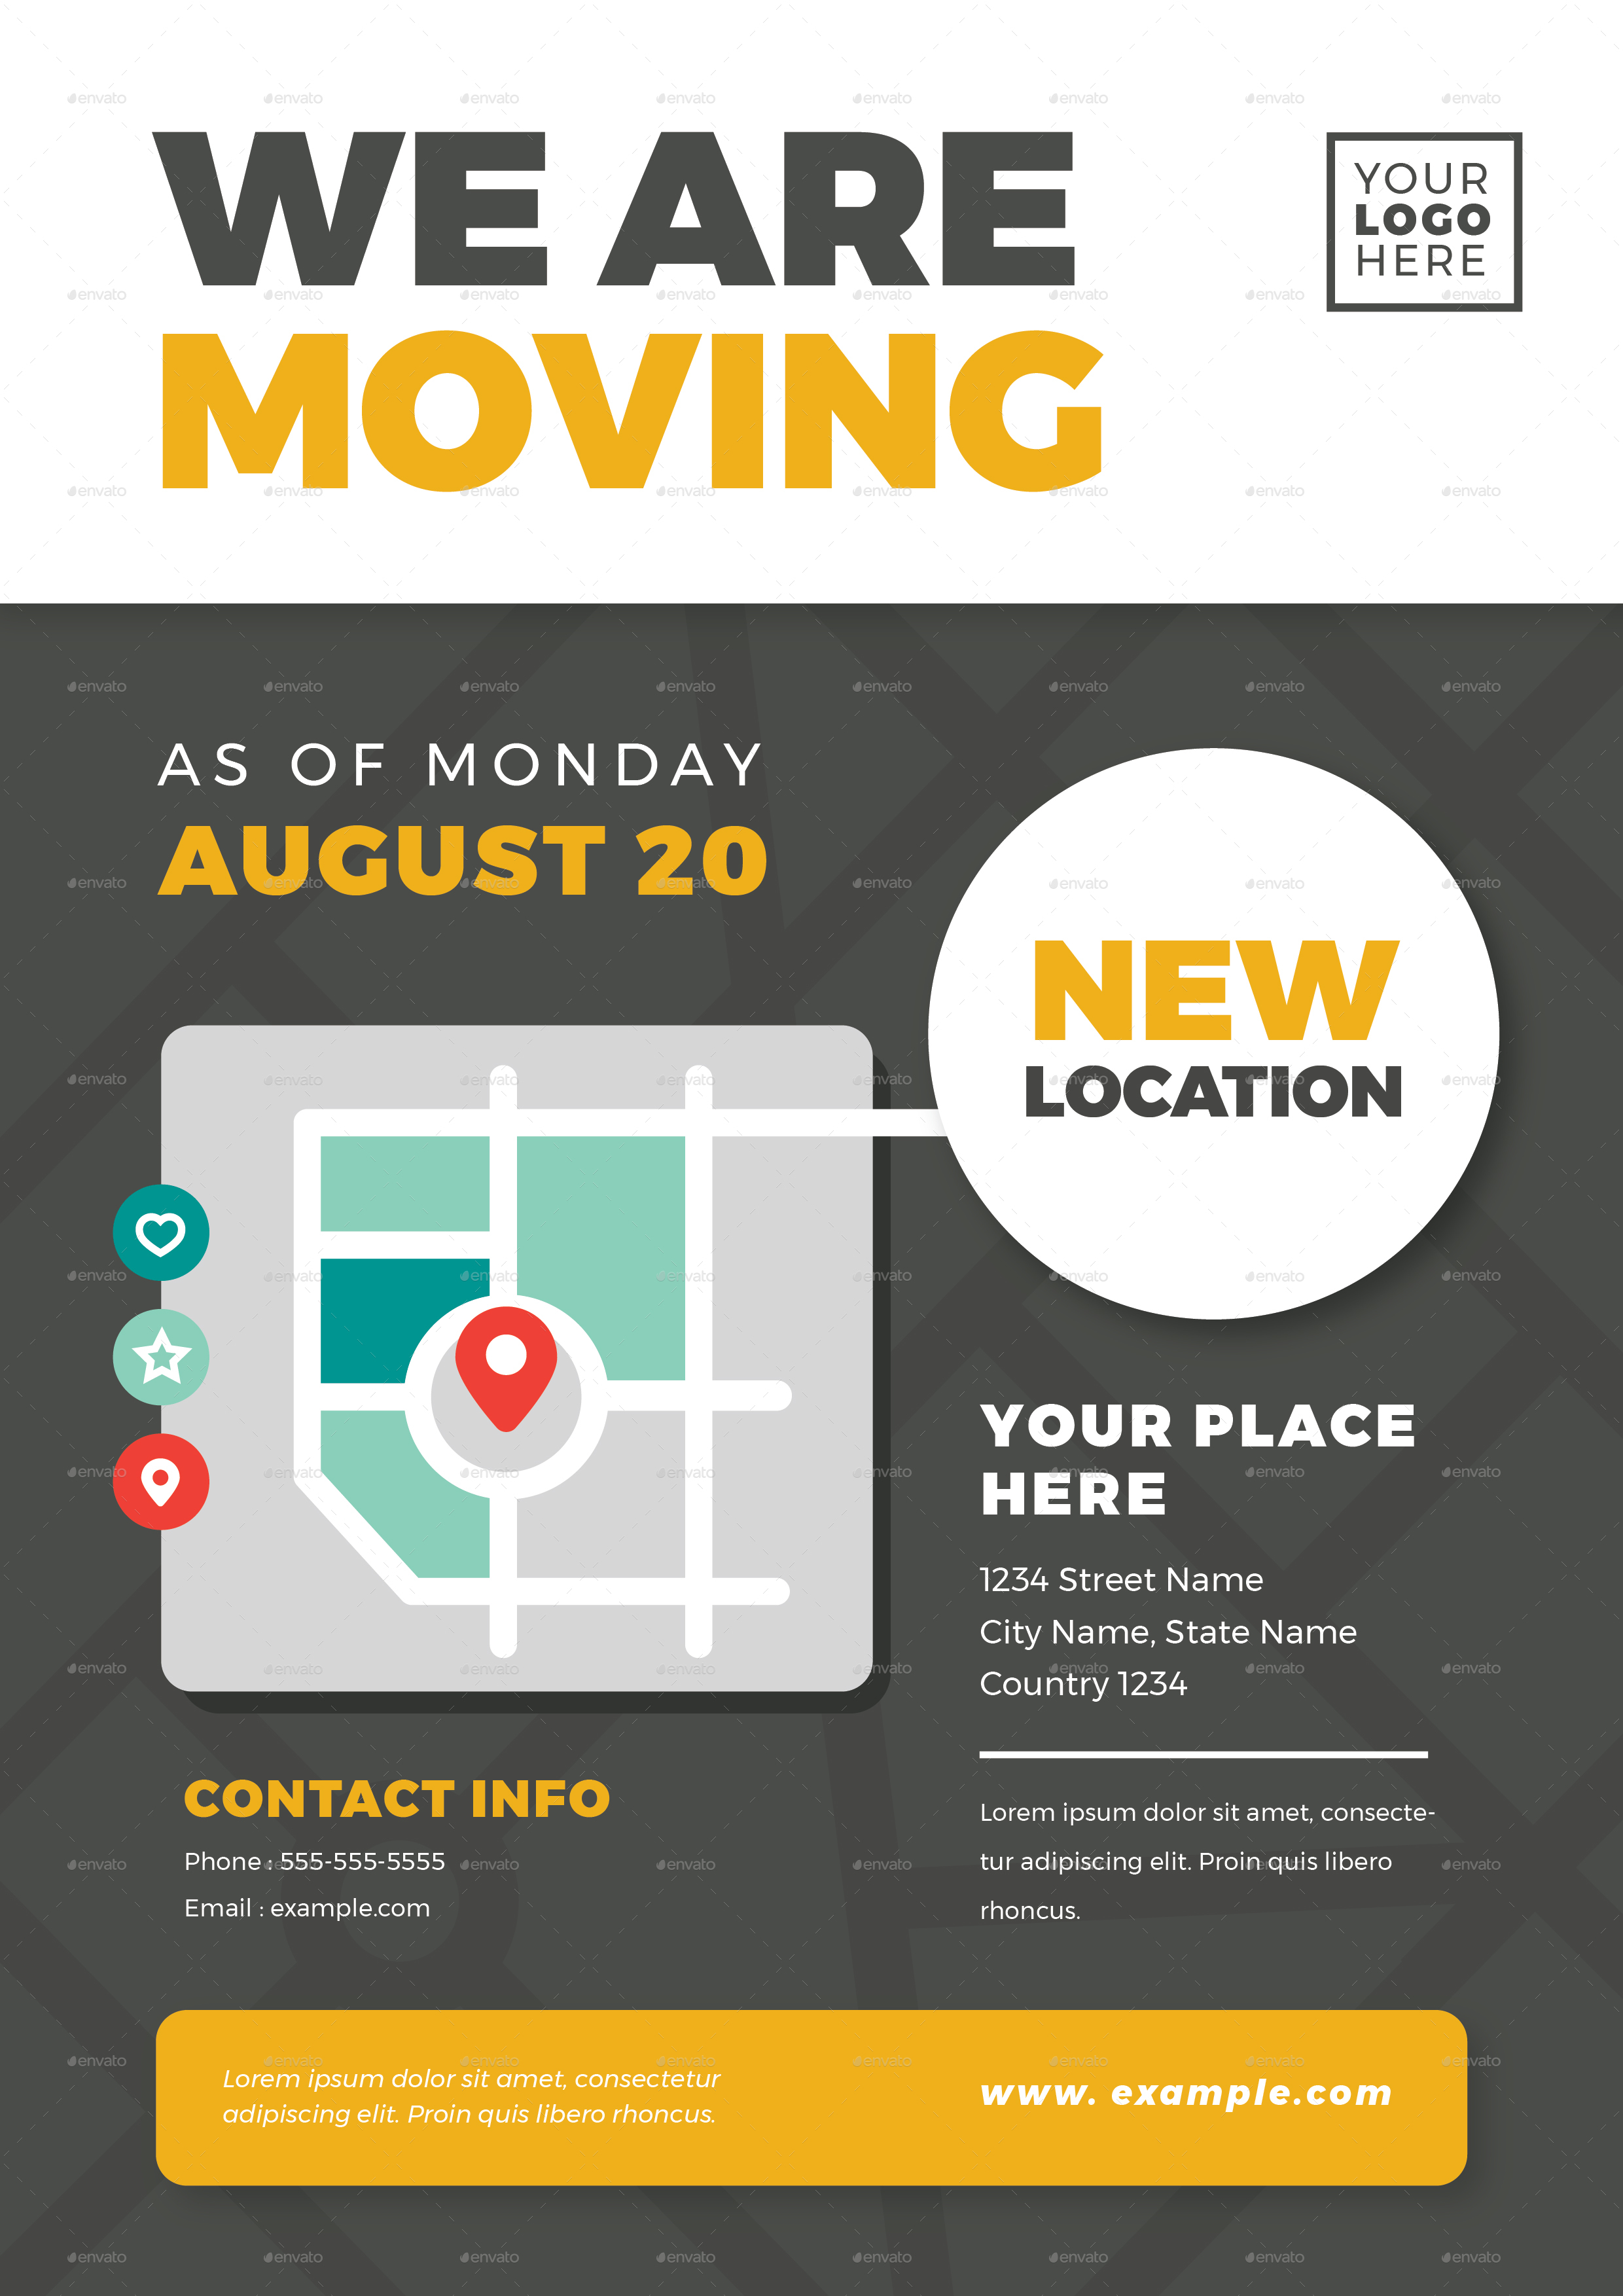 We Are Moving Flyer Templates by Vector_Vactory GraphicRiver